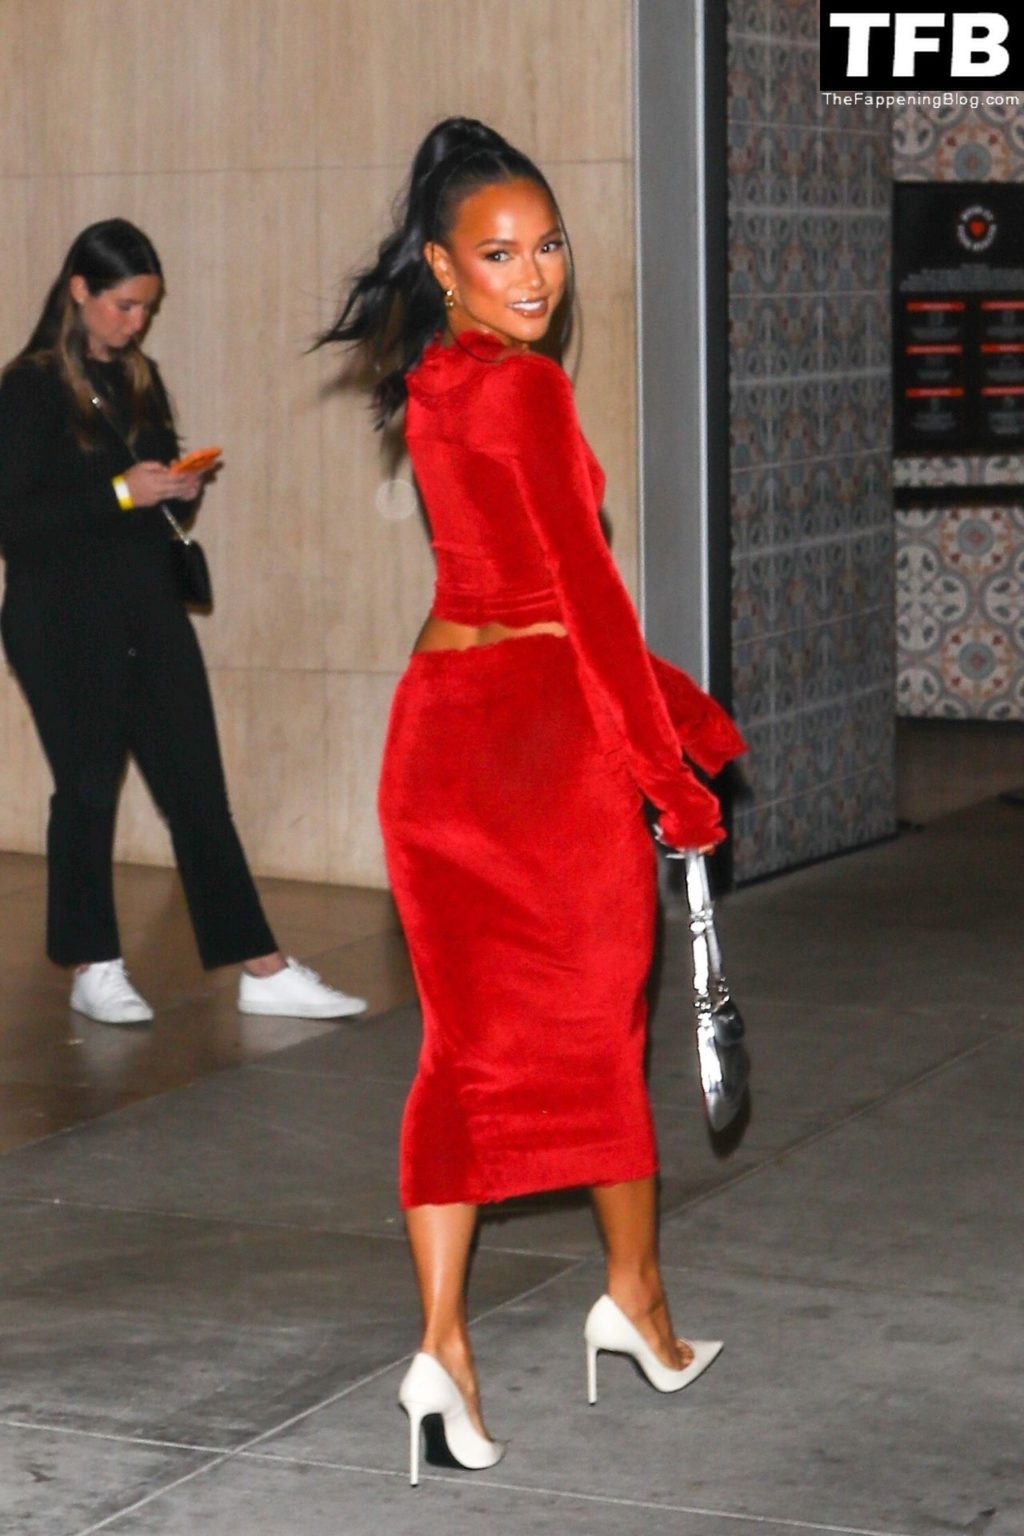 Karrueche Tran Sexy The Fappening Blog 45 1024x1536 - Karrueche Tran Shows Her Pokies in a Red Dress at The Hollywood Reporter’s Oscar Nominees Night (68 Photos)